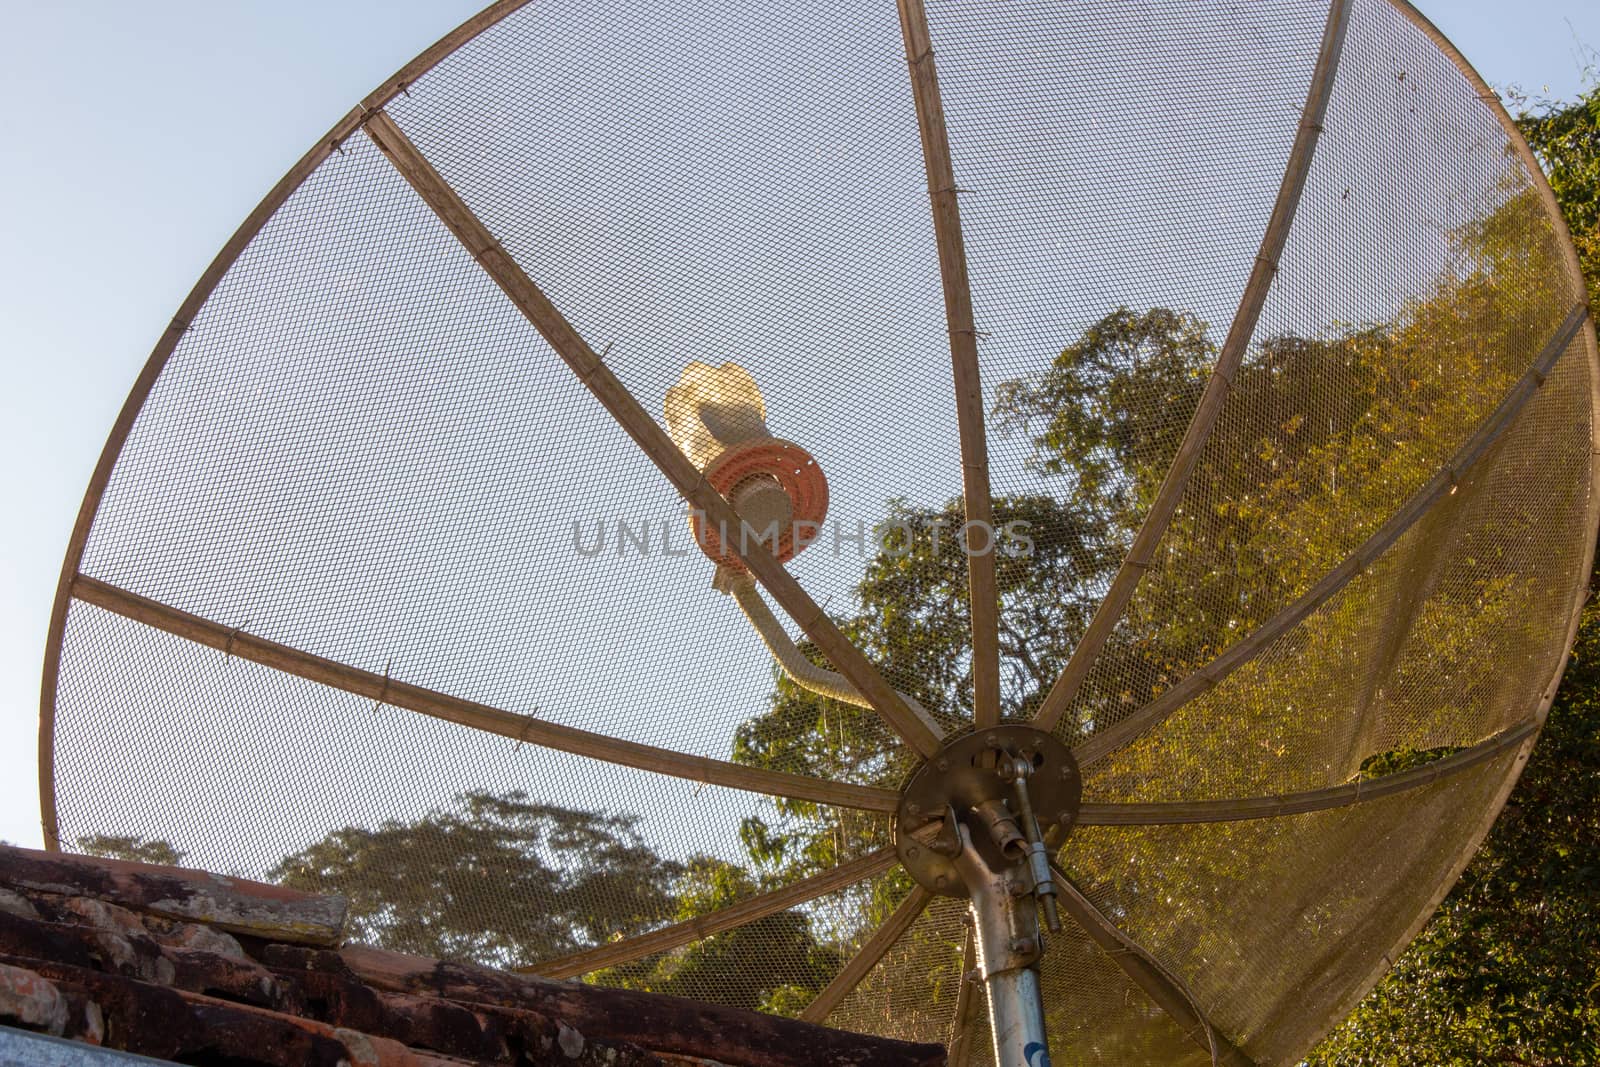 Parabolic antenna for receive TV signal from satellites by etcho